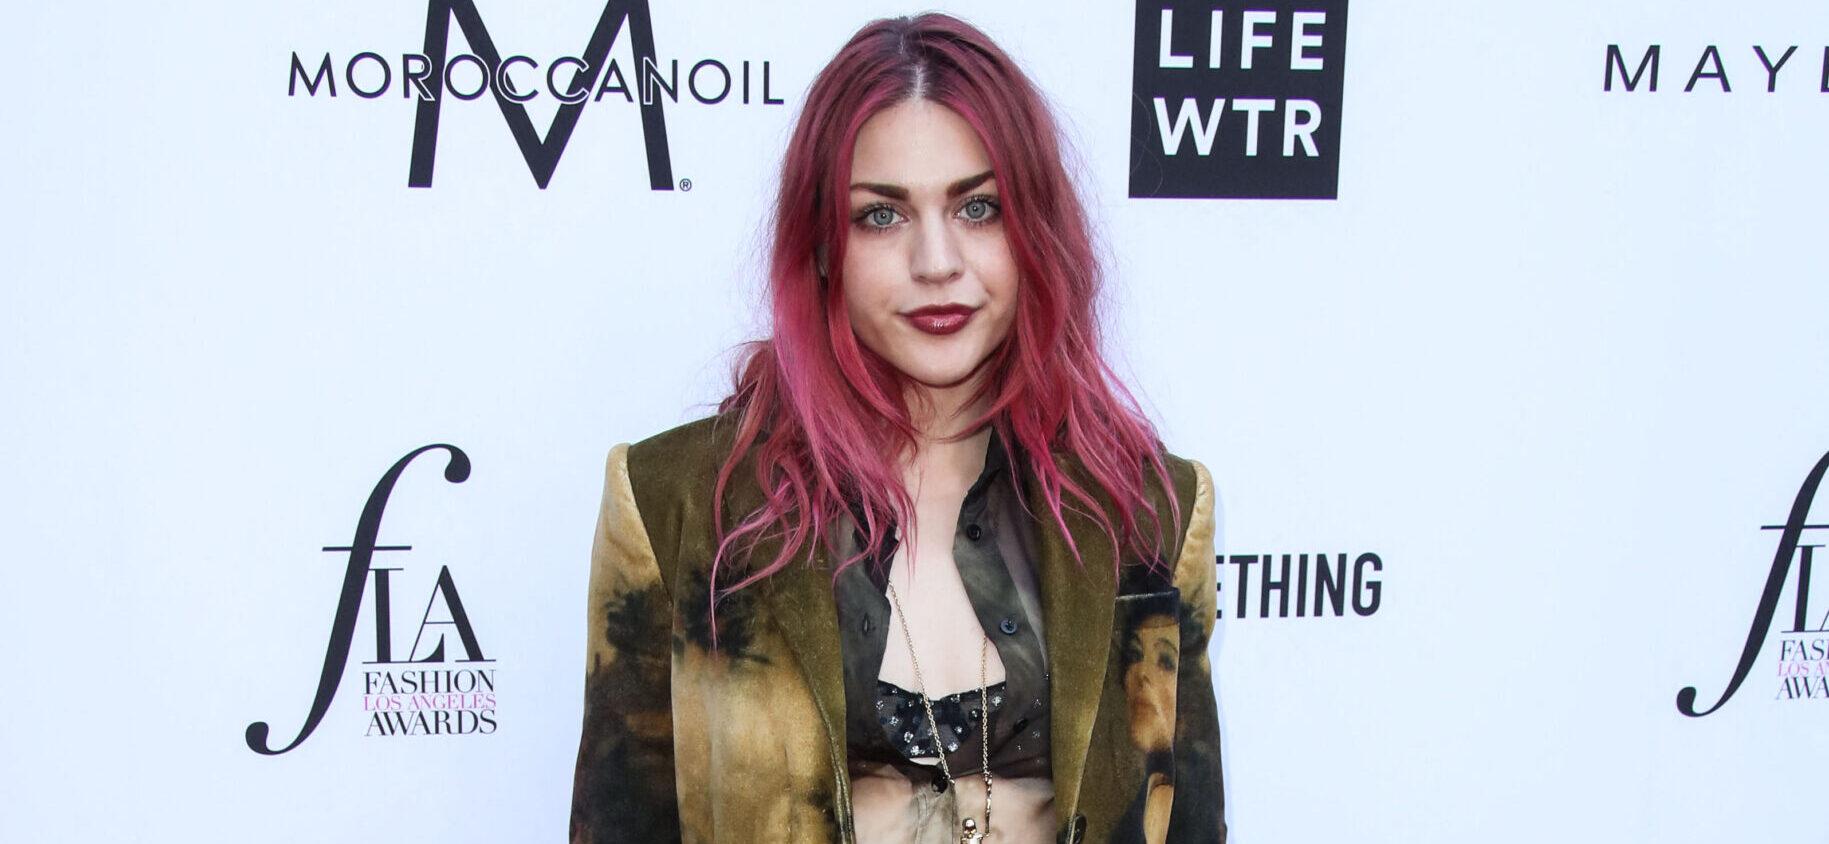 Kurt Cobain’s Daughter Weds Tony Hawk’s Son In Intimate Wedding Officiated By THIS Iconic Singer